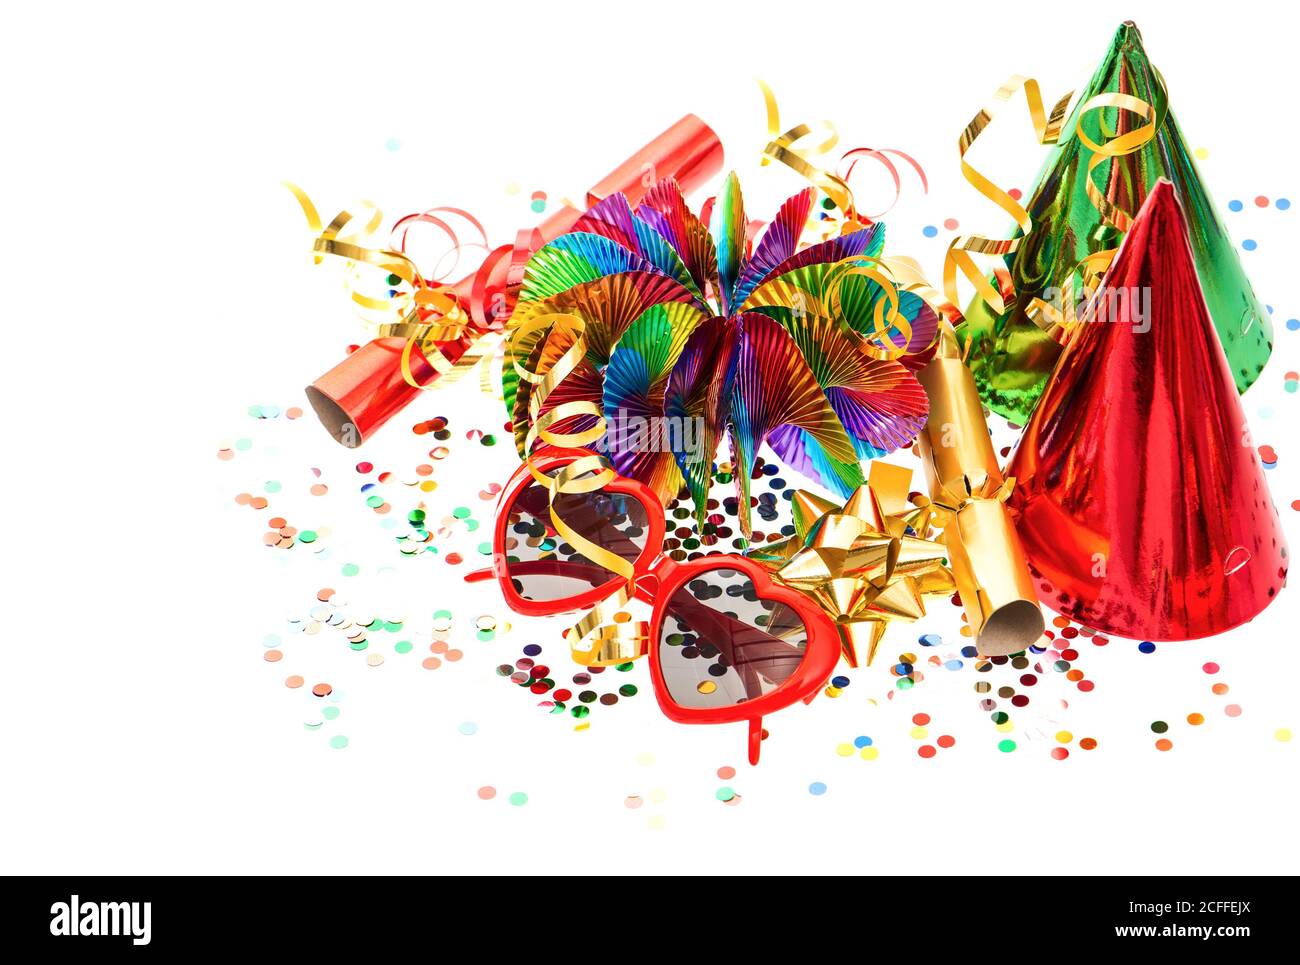 Party decoration garlands, streamer, cracker and confetti. Birthday, carnival, holidays background Stock Photo